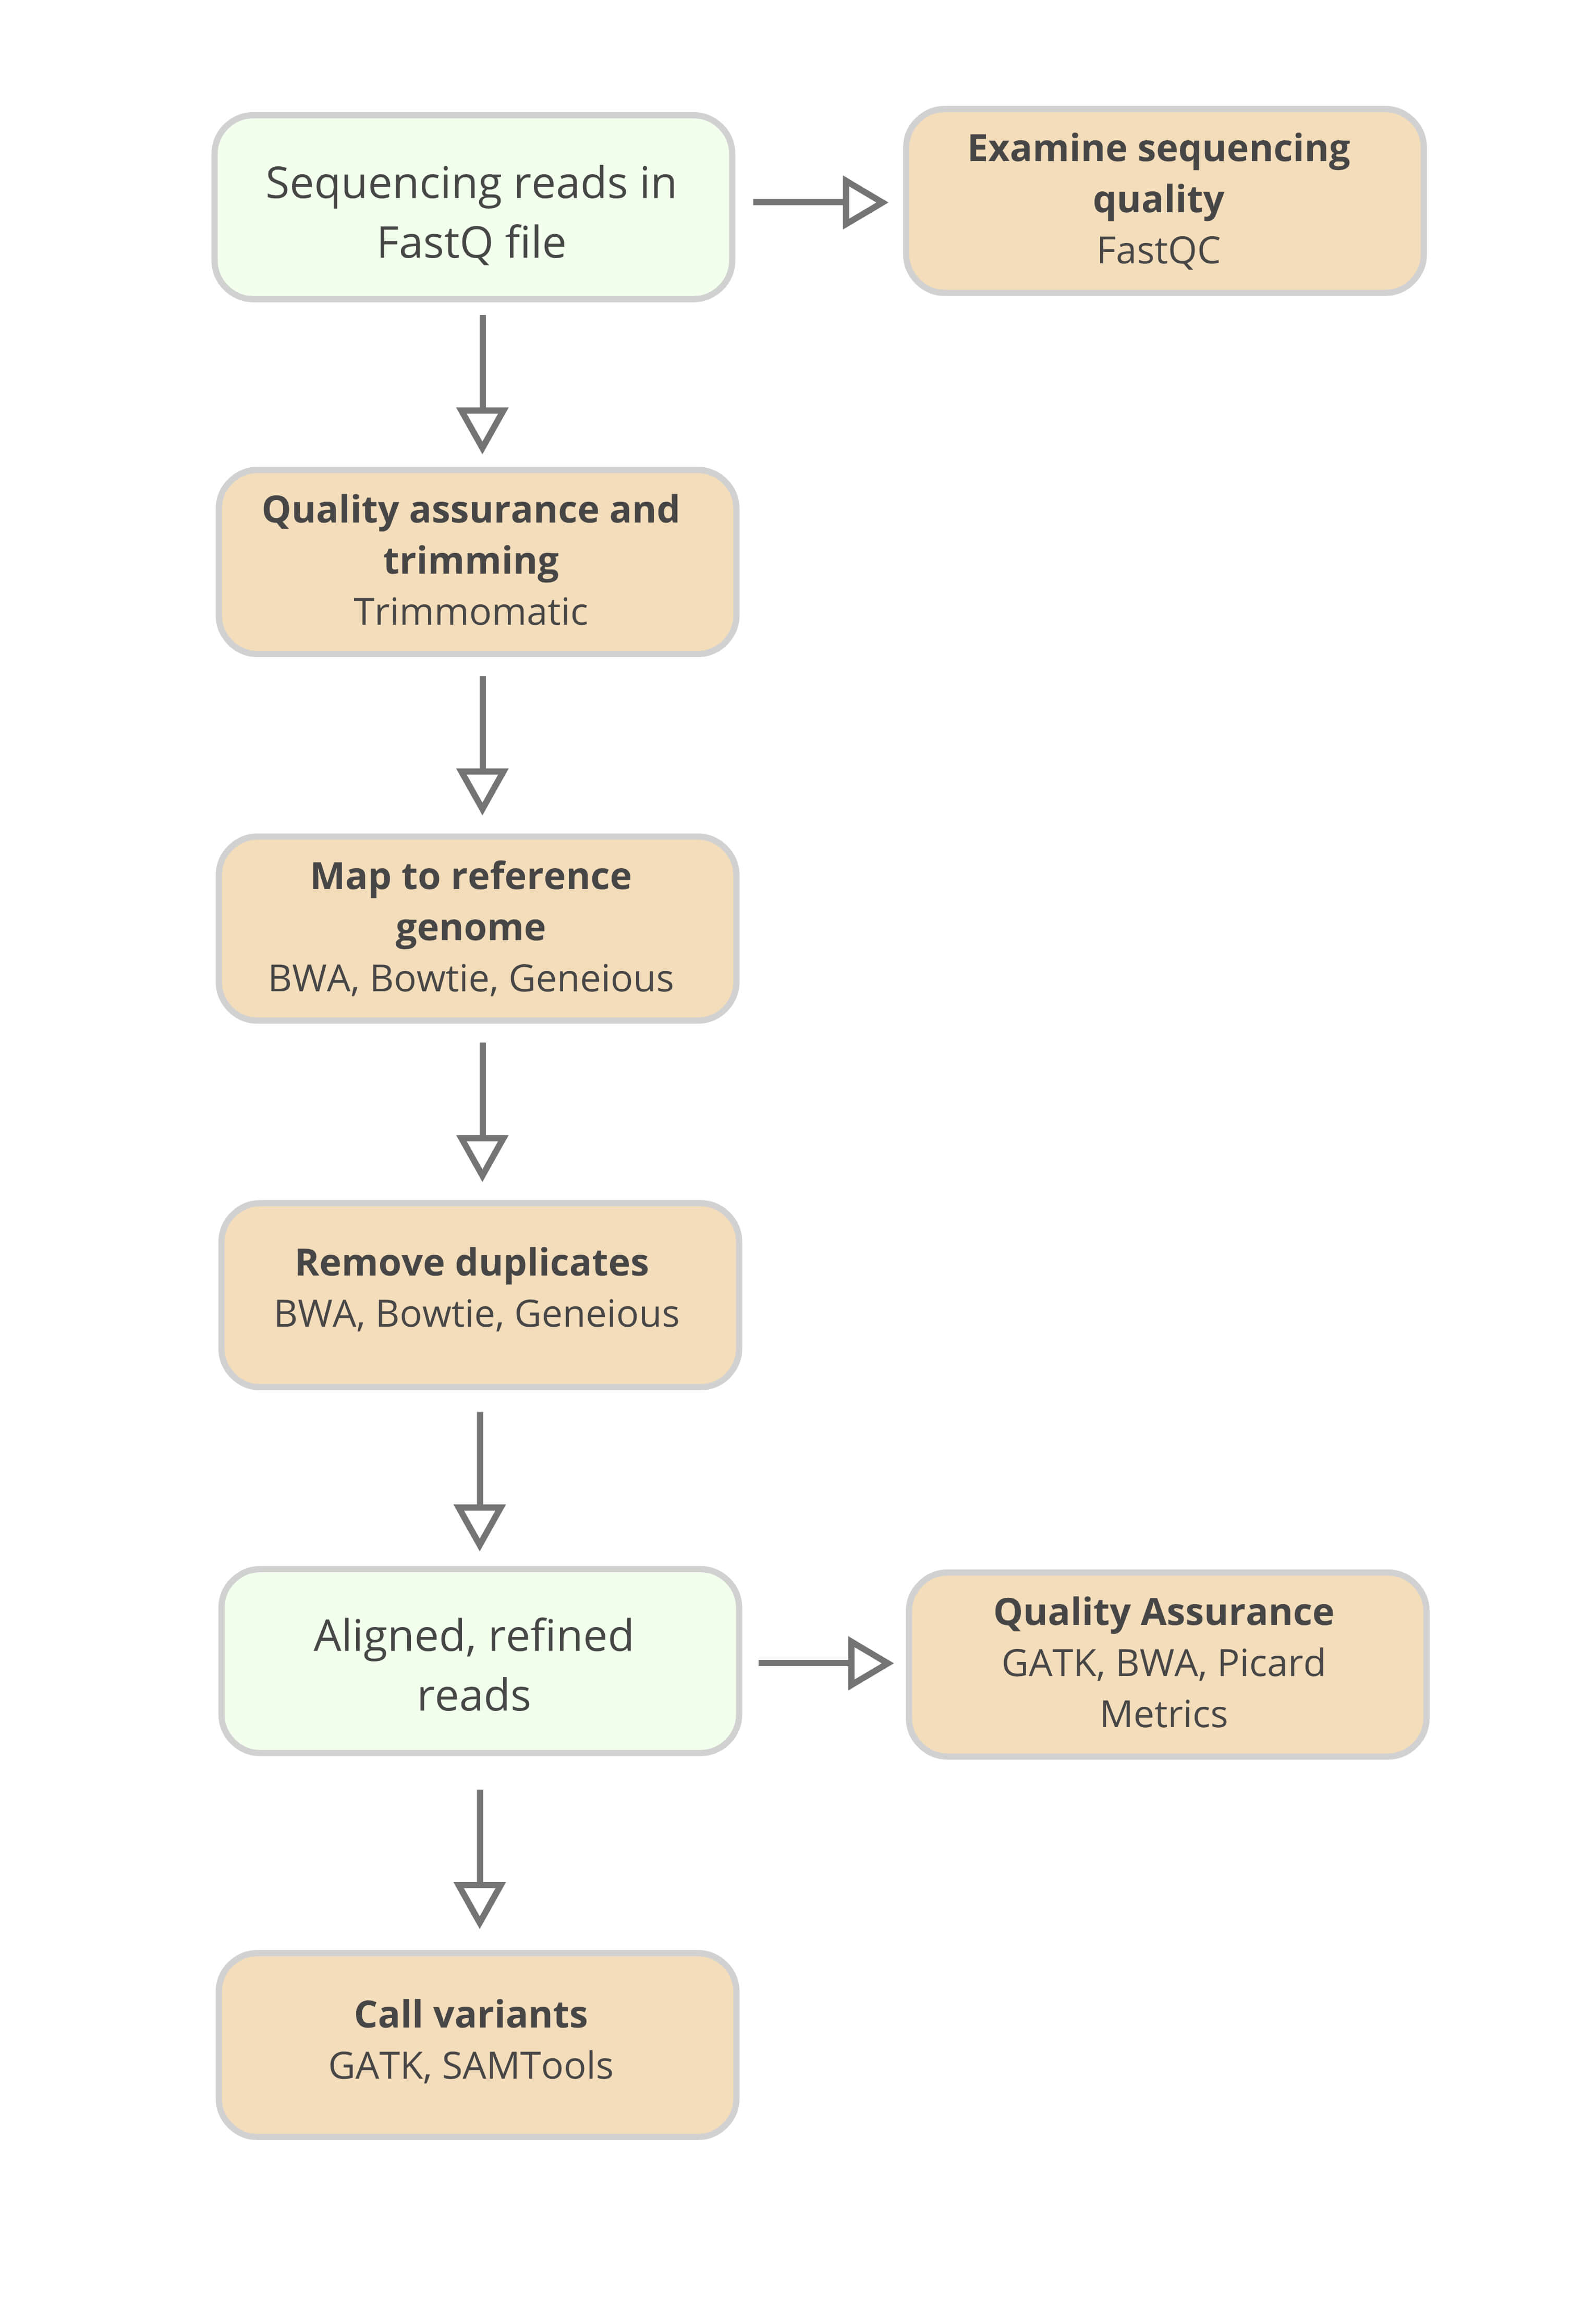 A typical data analysis workflow for exome sequencing including programs, commonly used at each step